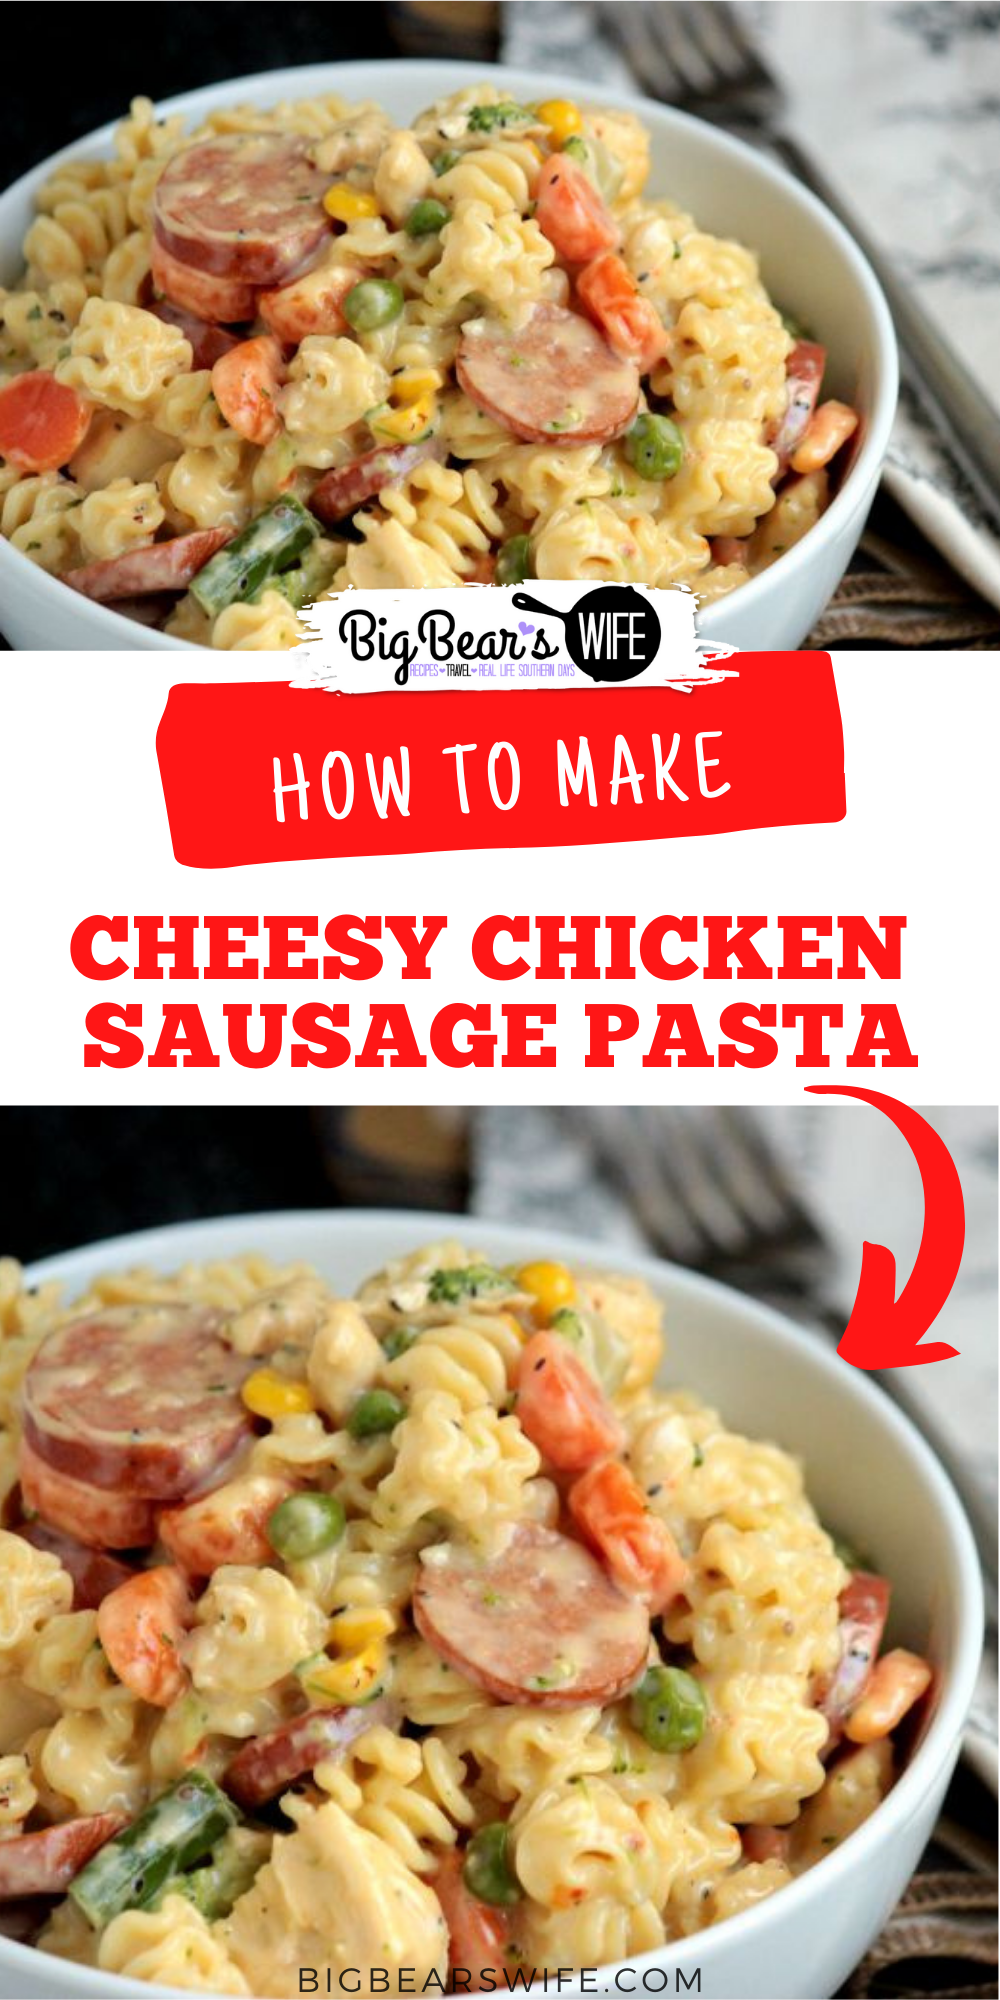  Cheesy Chicken & Sausage Pasta – This Cheesy Chicken & Sausage Pasta is a copycat homemade version of the frozen bags of cheesy chicken pasta that comes from the grocery store! via @bigbearswife